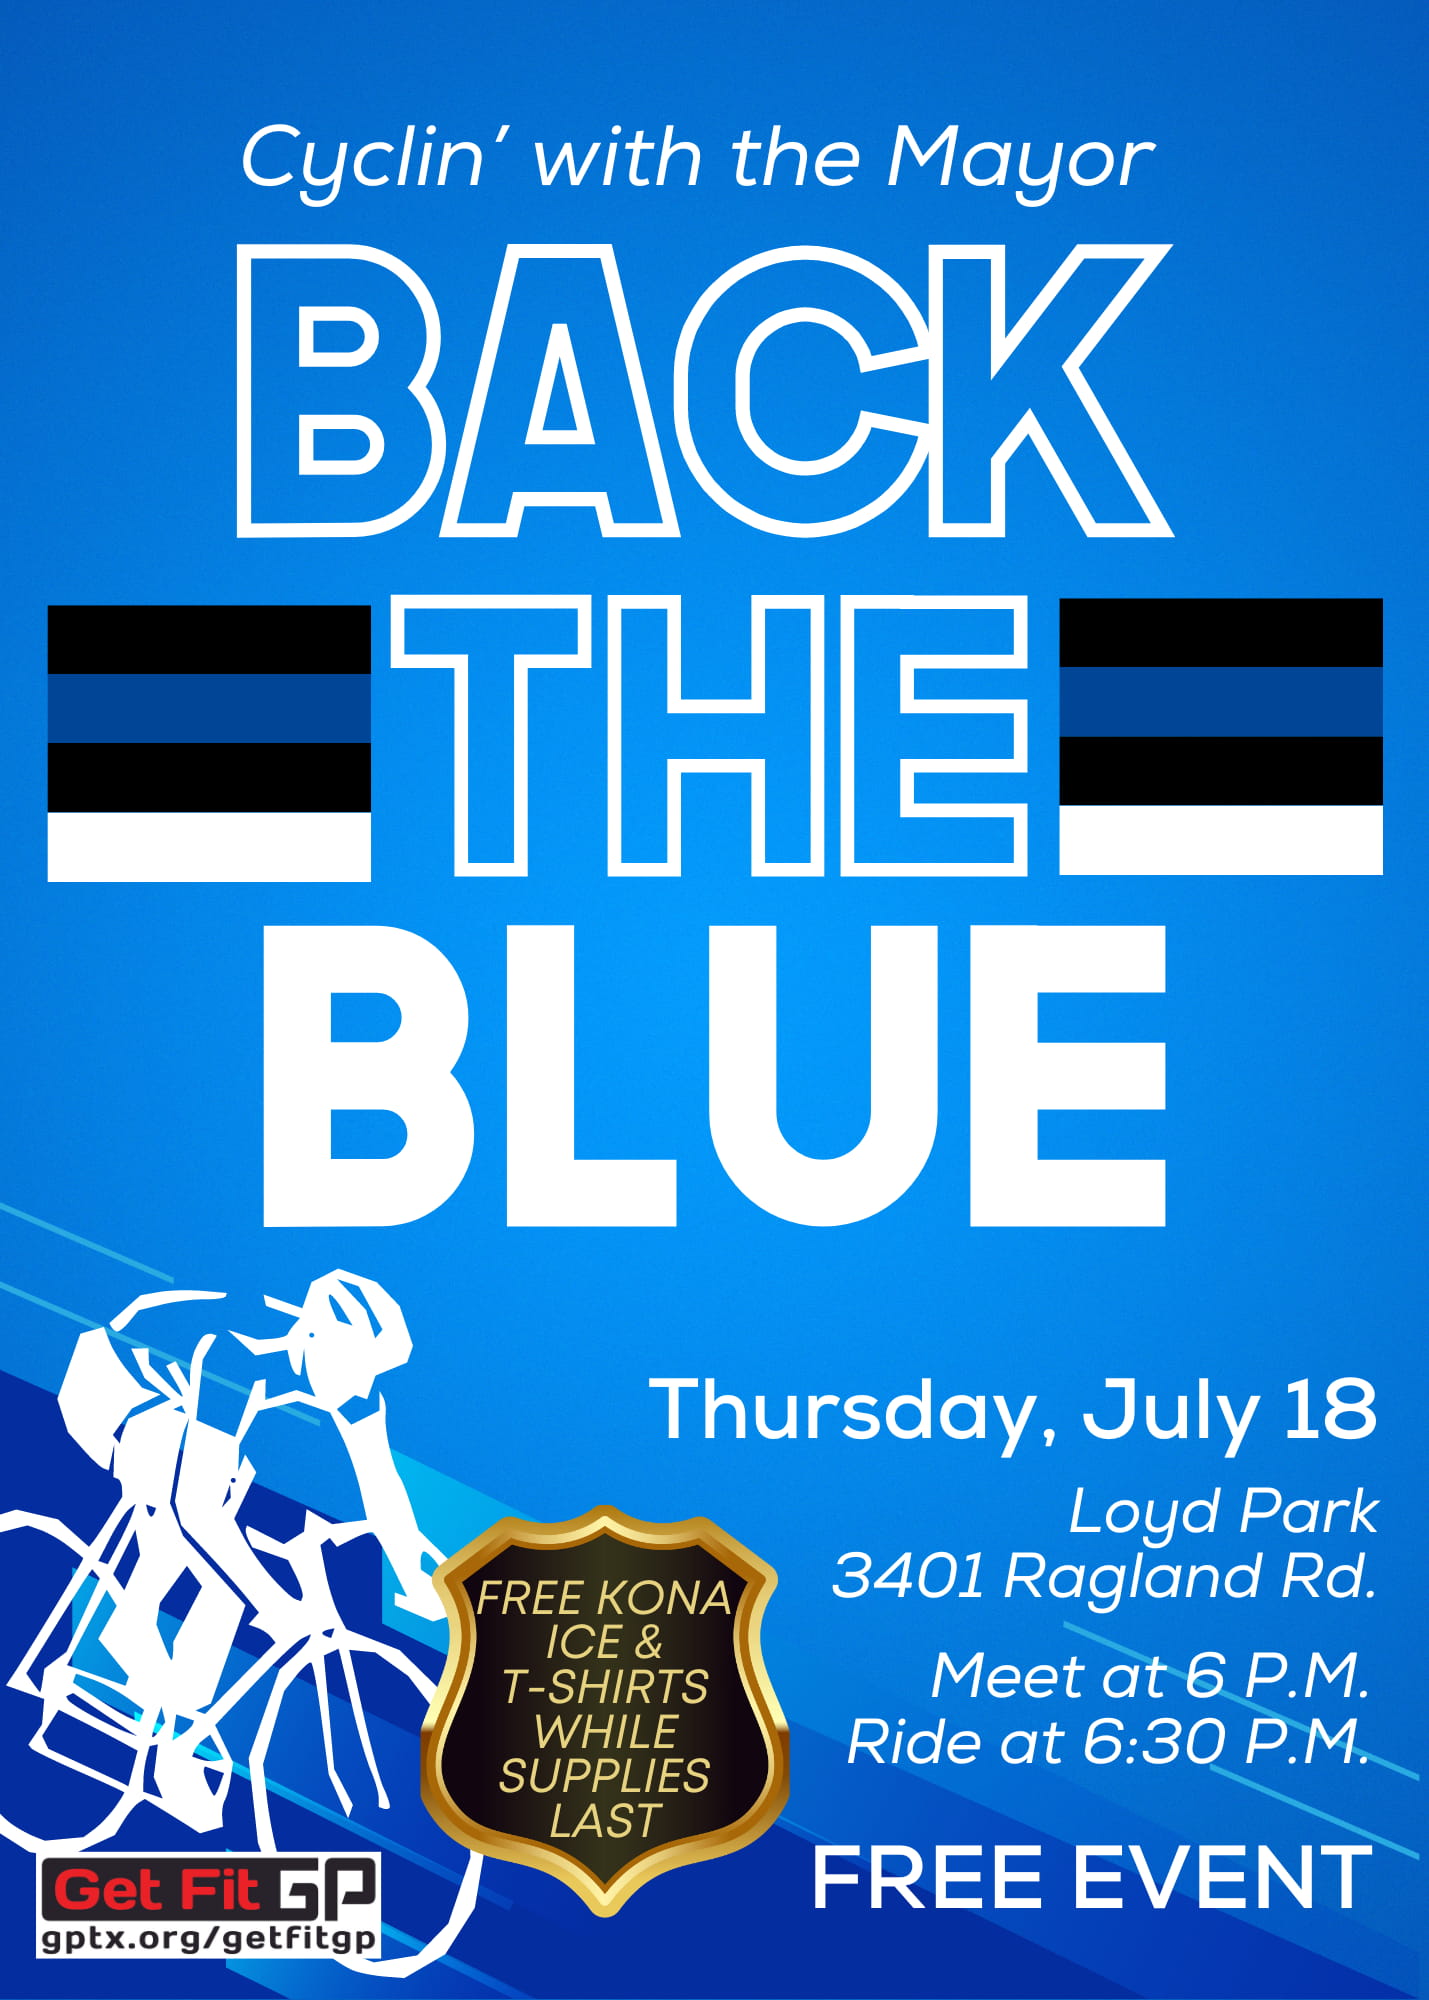 Cyclin' with the Mayor - Back the Blue ride flyer; ride is on July 18 at Loyd Park, 3401 Ragland Rd. at 6:30pm (meet at 6pm)